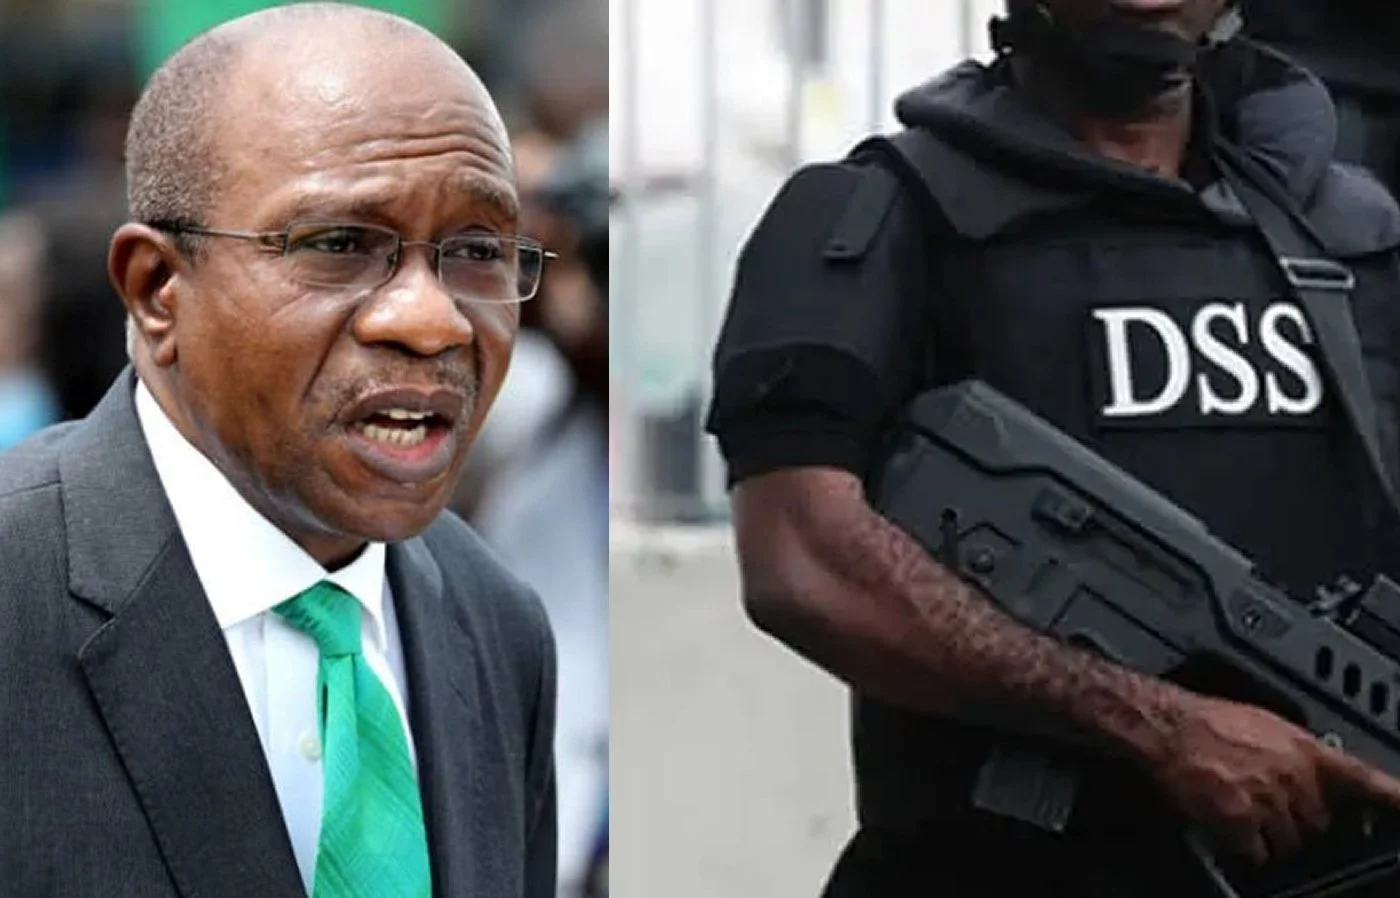 Just In: Few hours after the court order DSS charges Emefiele to court